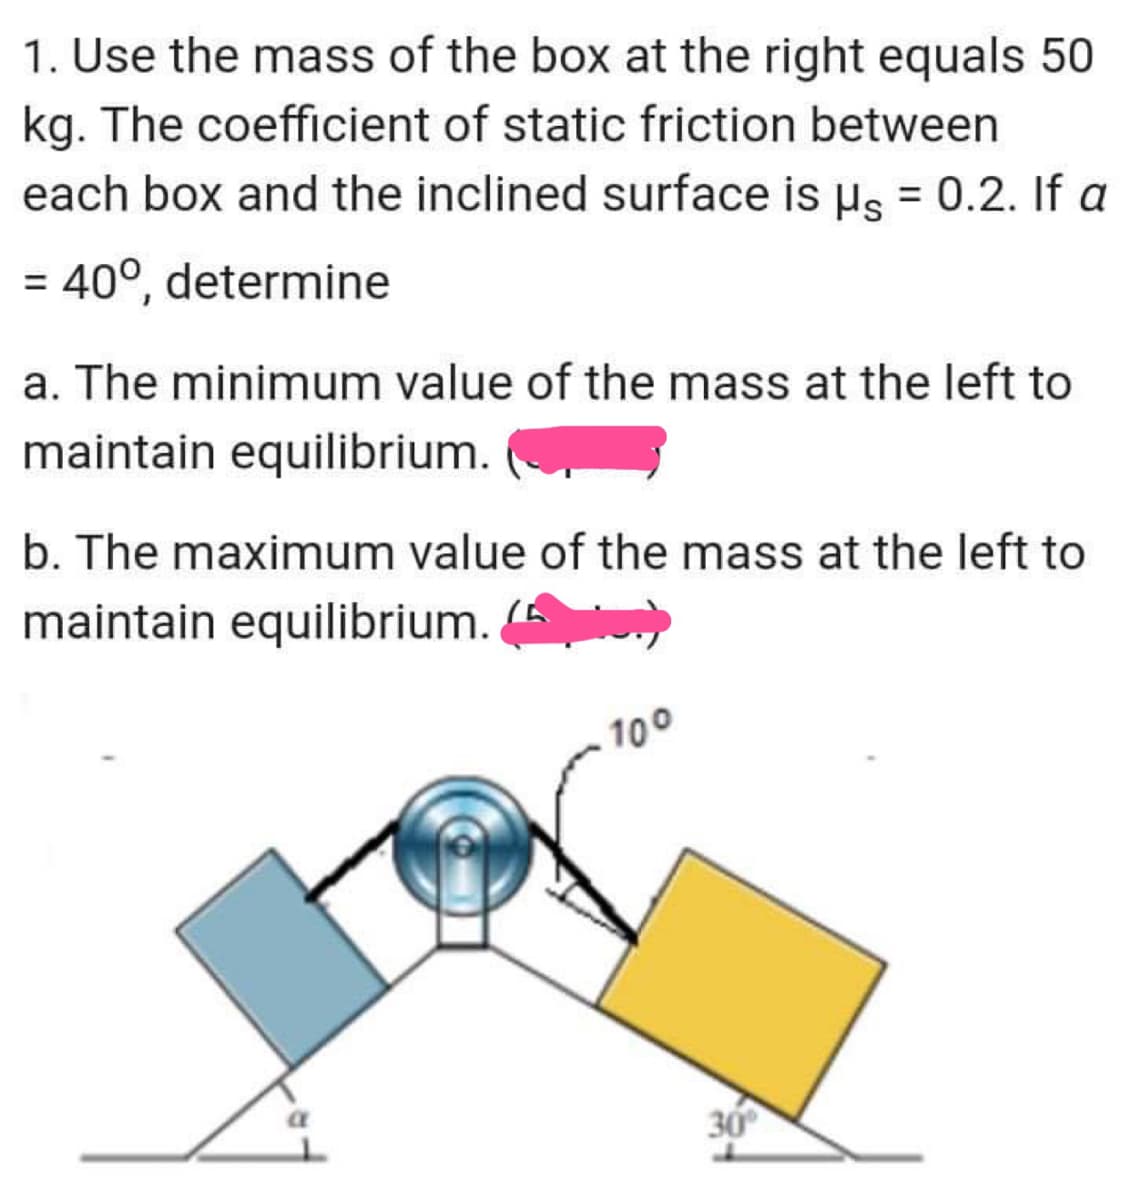 1. Use the mass of the box at the right equals 50
kg. The coefficient of static friction between
each box and the inclined surface is µs = 0.2. If a
= 40°, determine
a. The minimum value of the mass at the left to
maintain equilibrium.
b. The maximum value of the mass at the left to
maintain equilibrium. (
100
30
